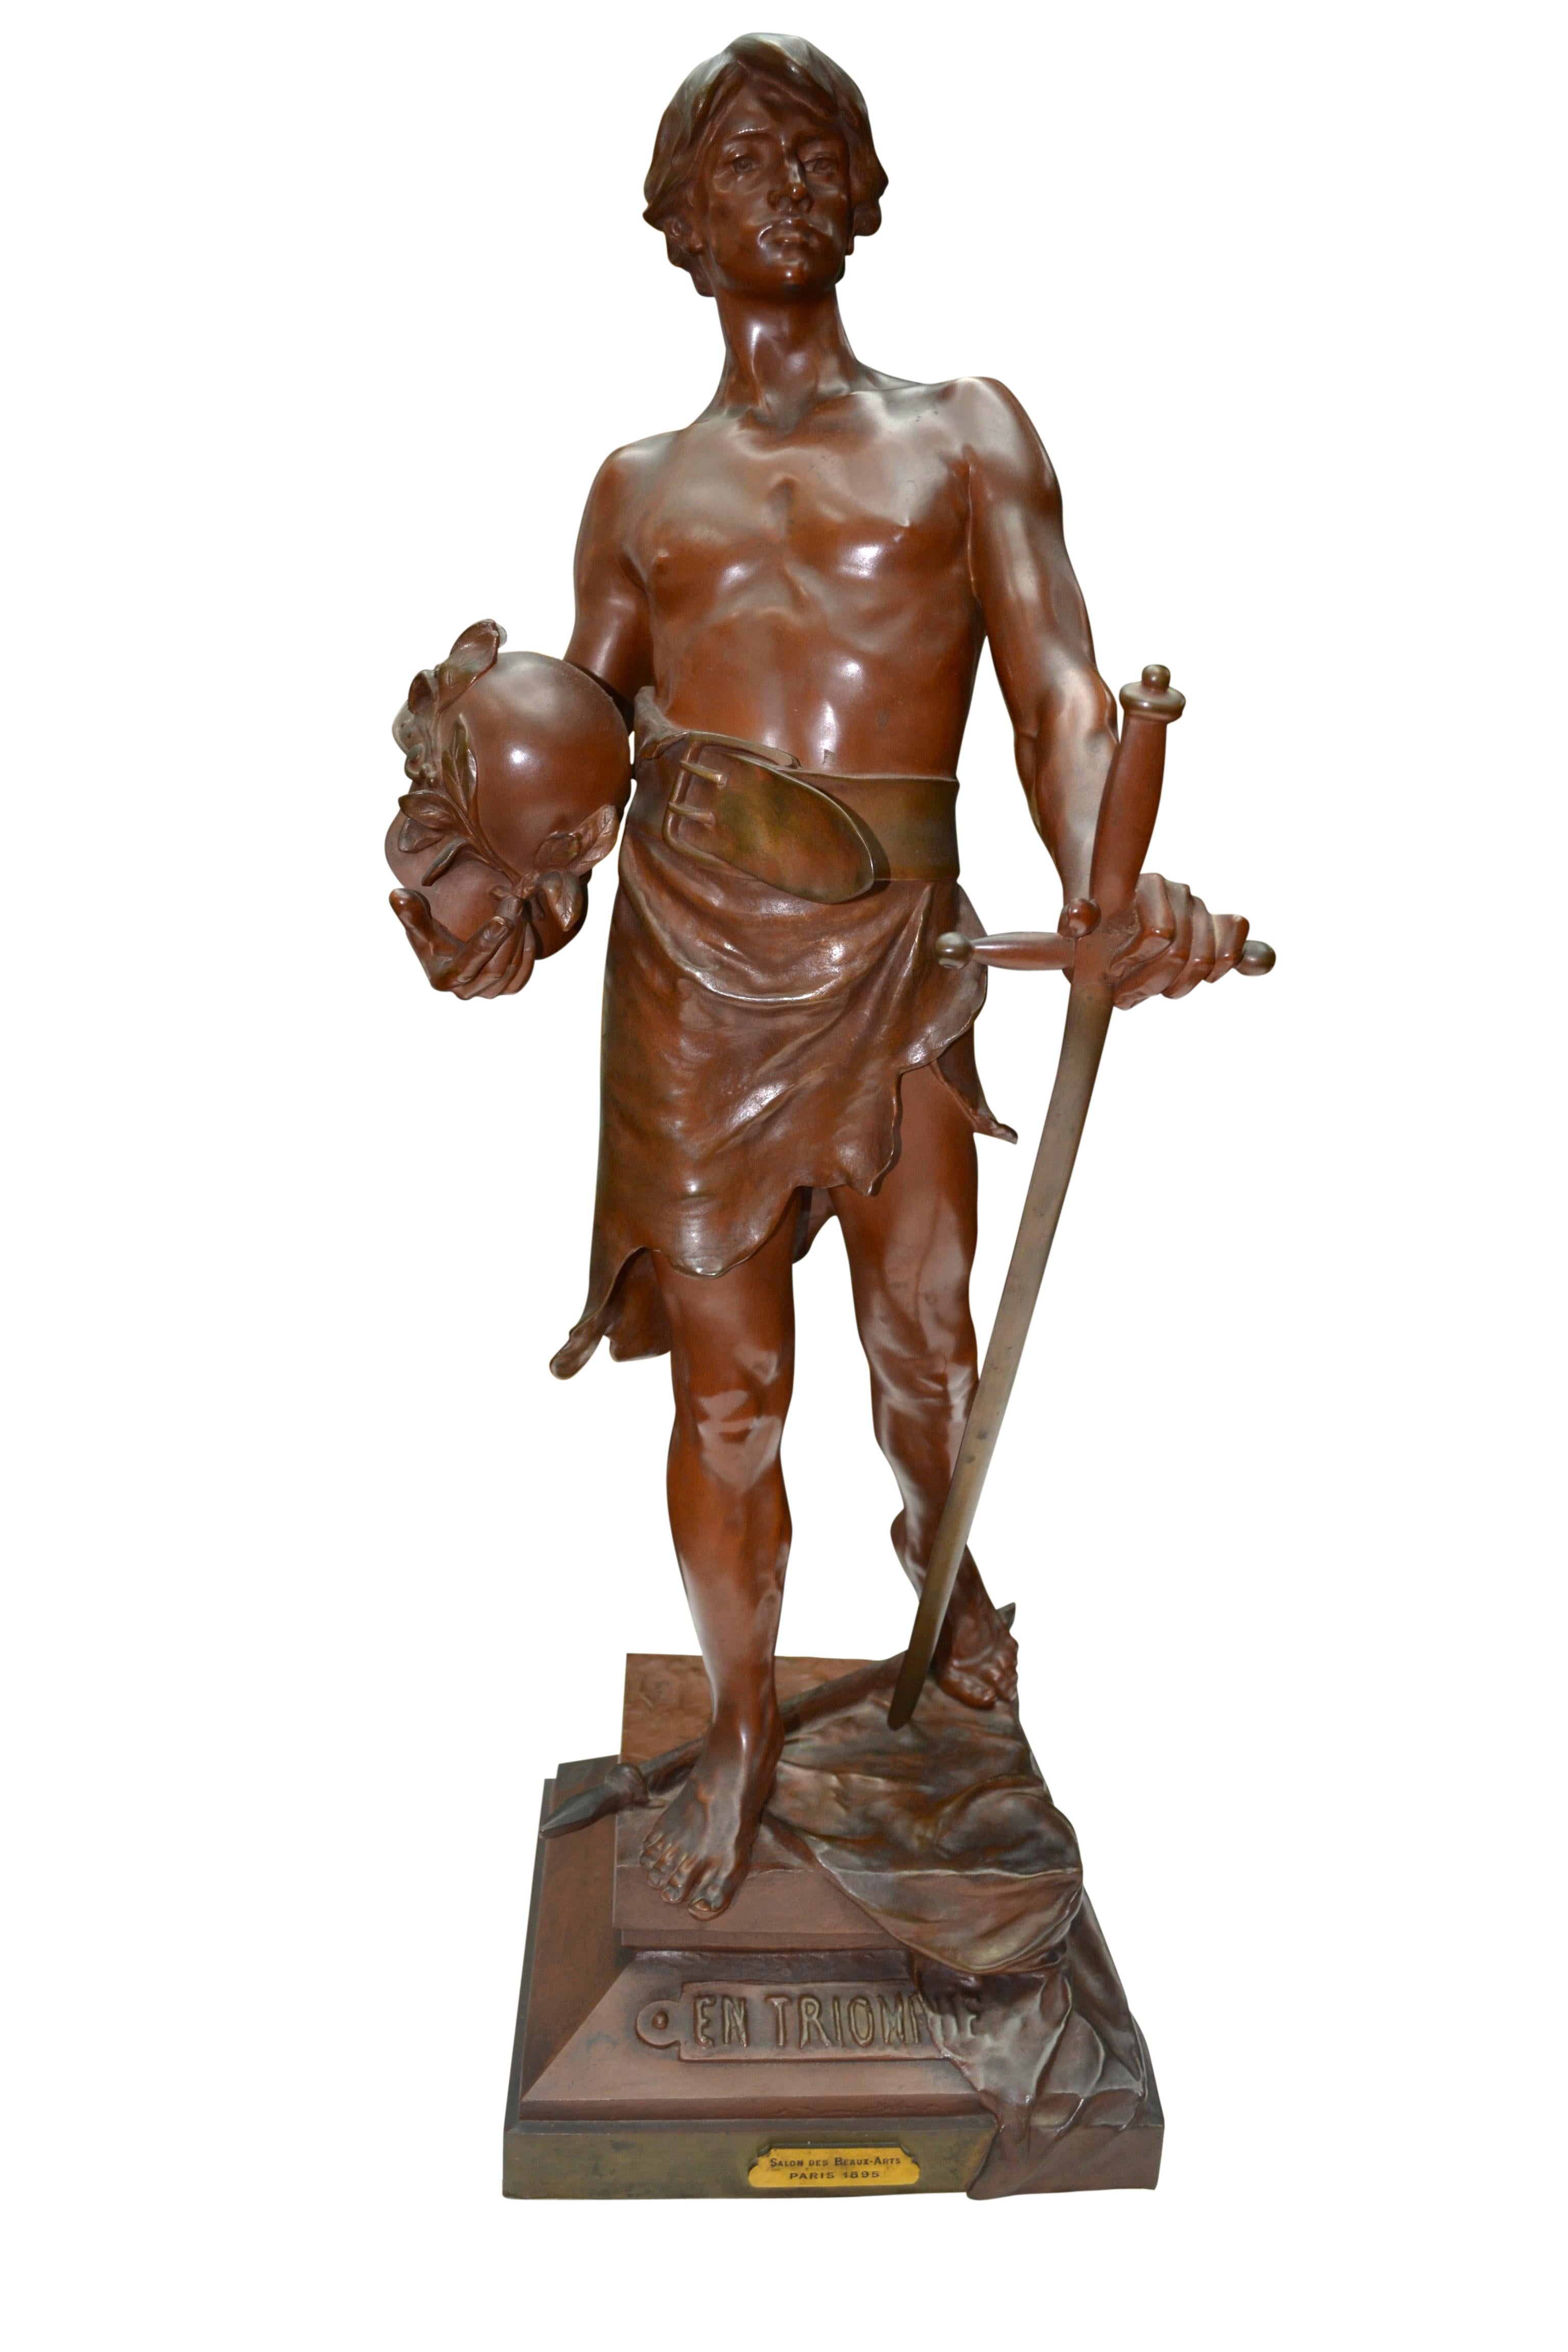 A beautifully cast bronze statue with chocolate color original patination of a standing bare chested warrior youth wearing an animal hide from his waist down held up by a thick buckled belt. In one hand the warrior is holding a helmet, the other is